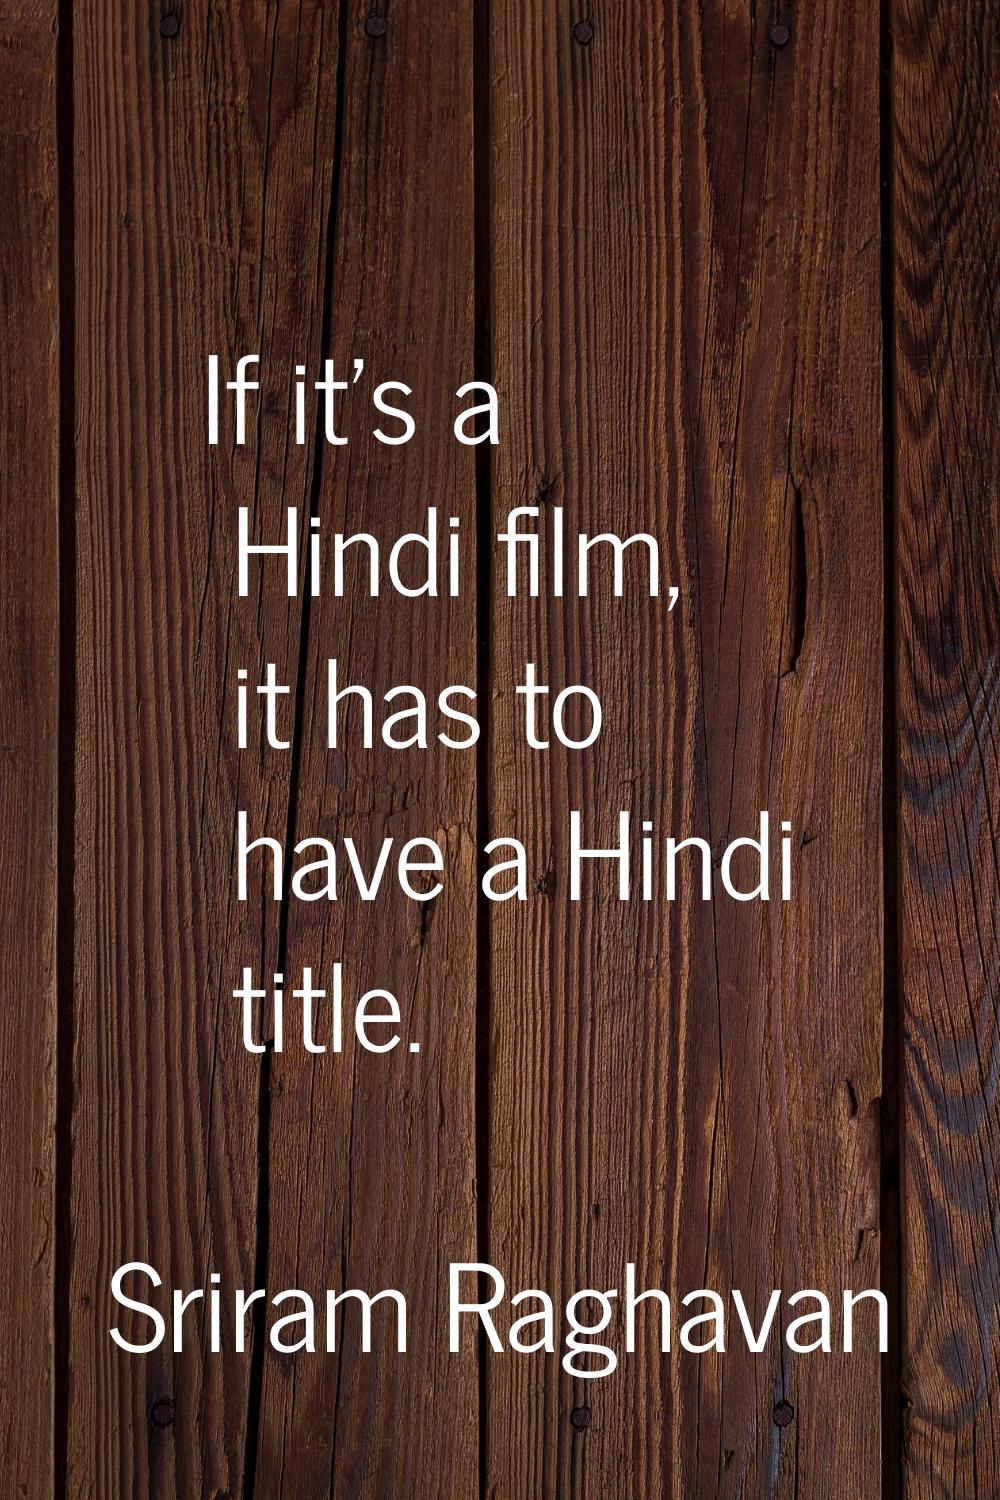 If it’s a Hindi film, it has to have a Hindi title.